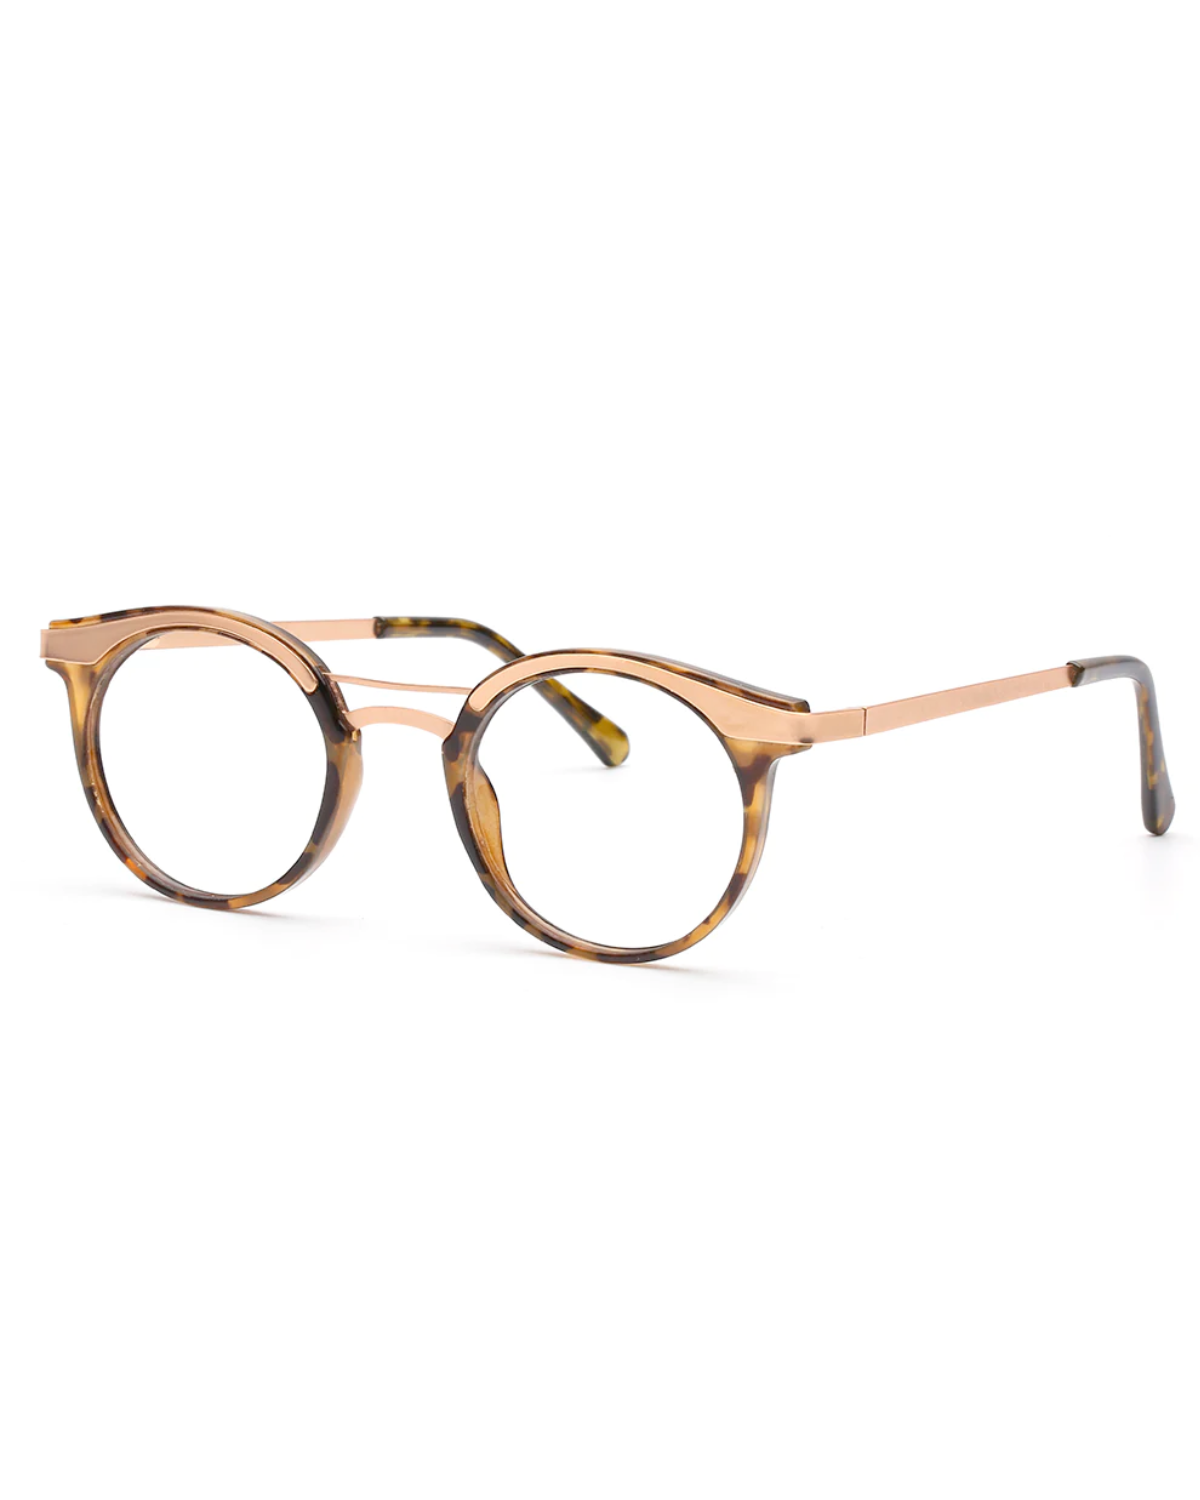 Alessa Rose Gold Metal Frame Readers 2.0 (Tortoise Accent)